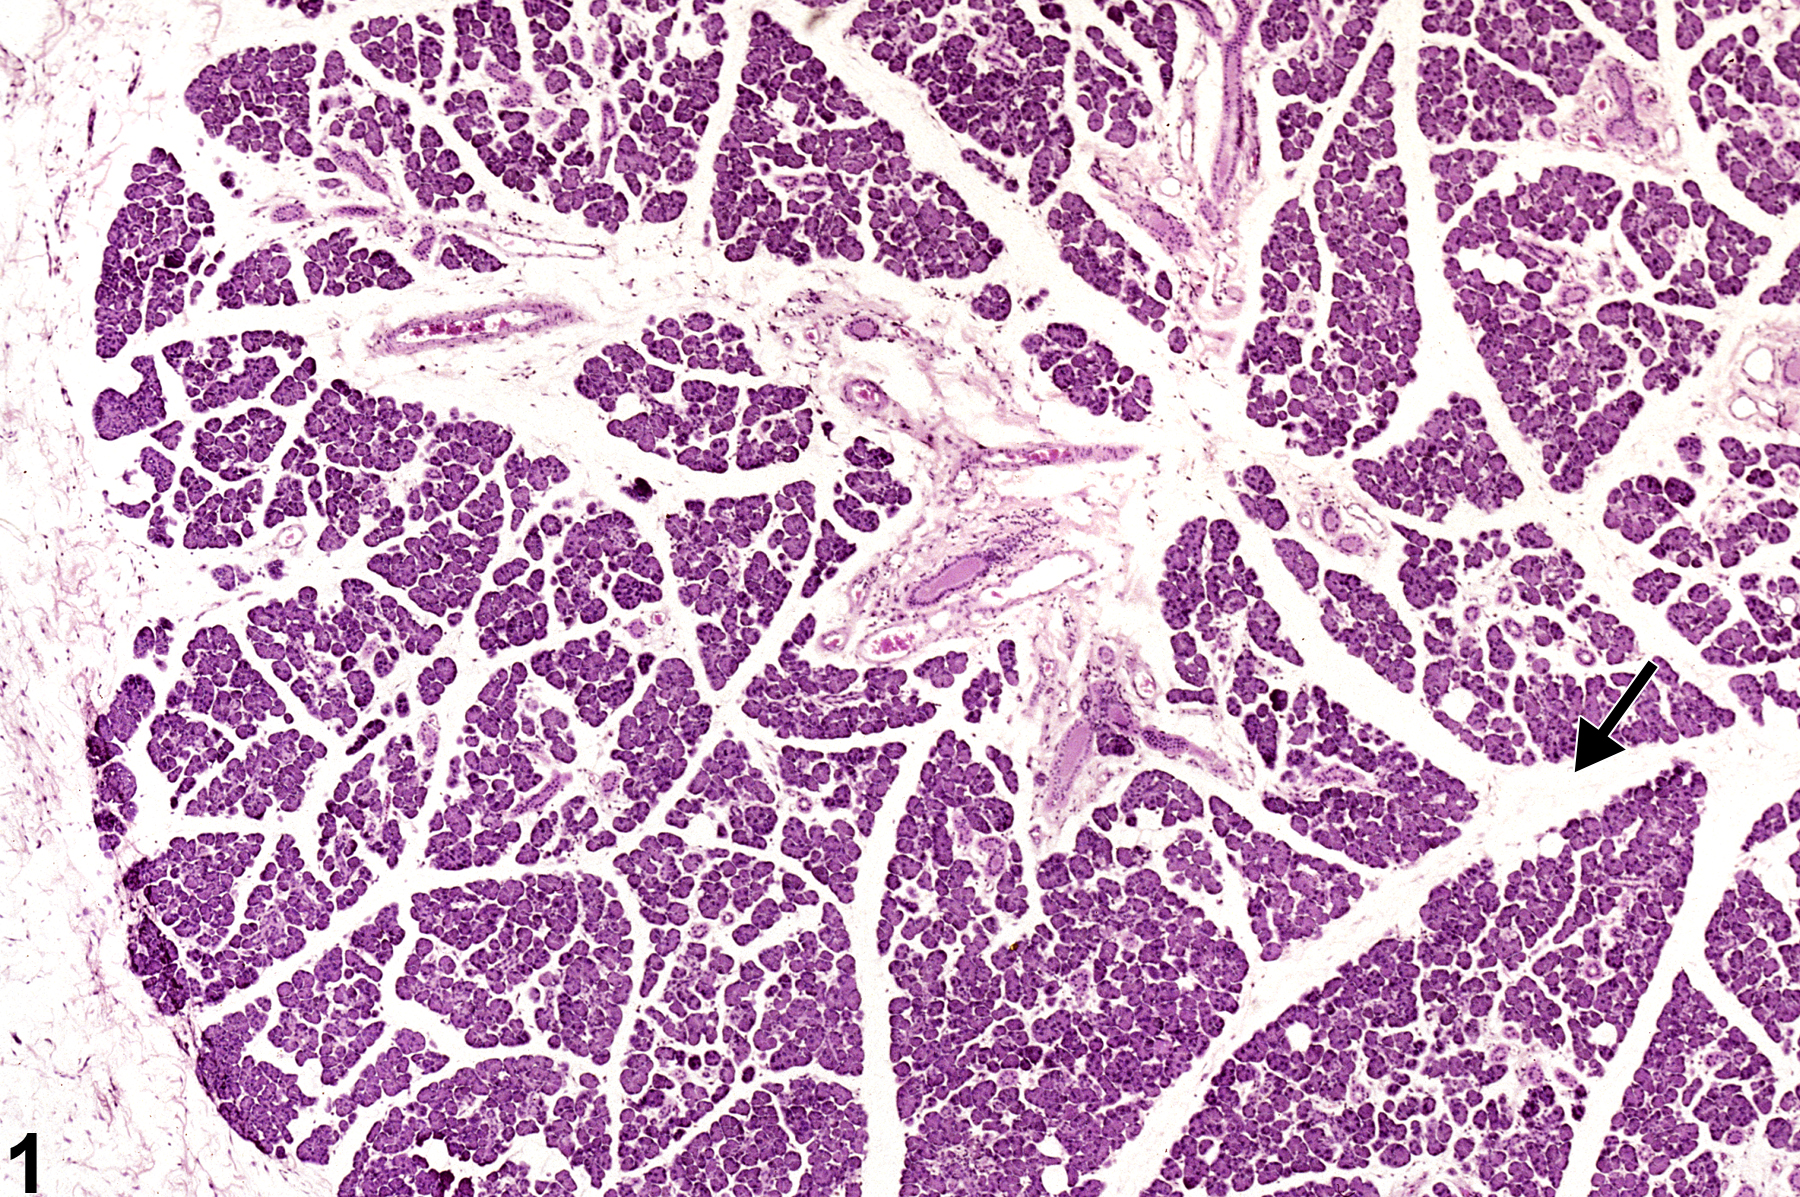 Image of edema in the salivary gland from a male F344/N rat in a chronic study